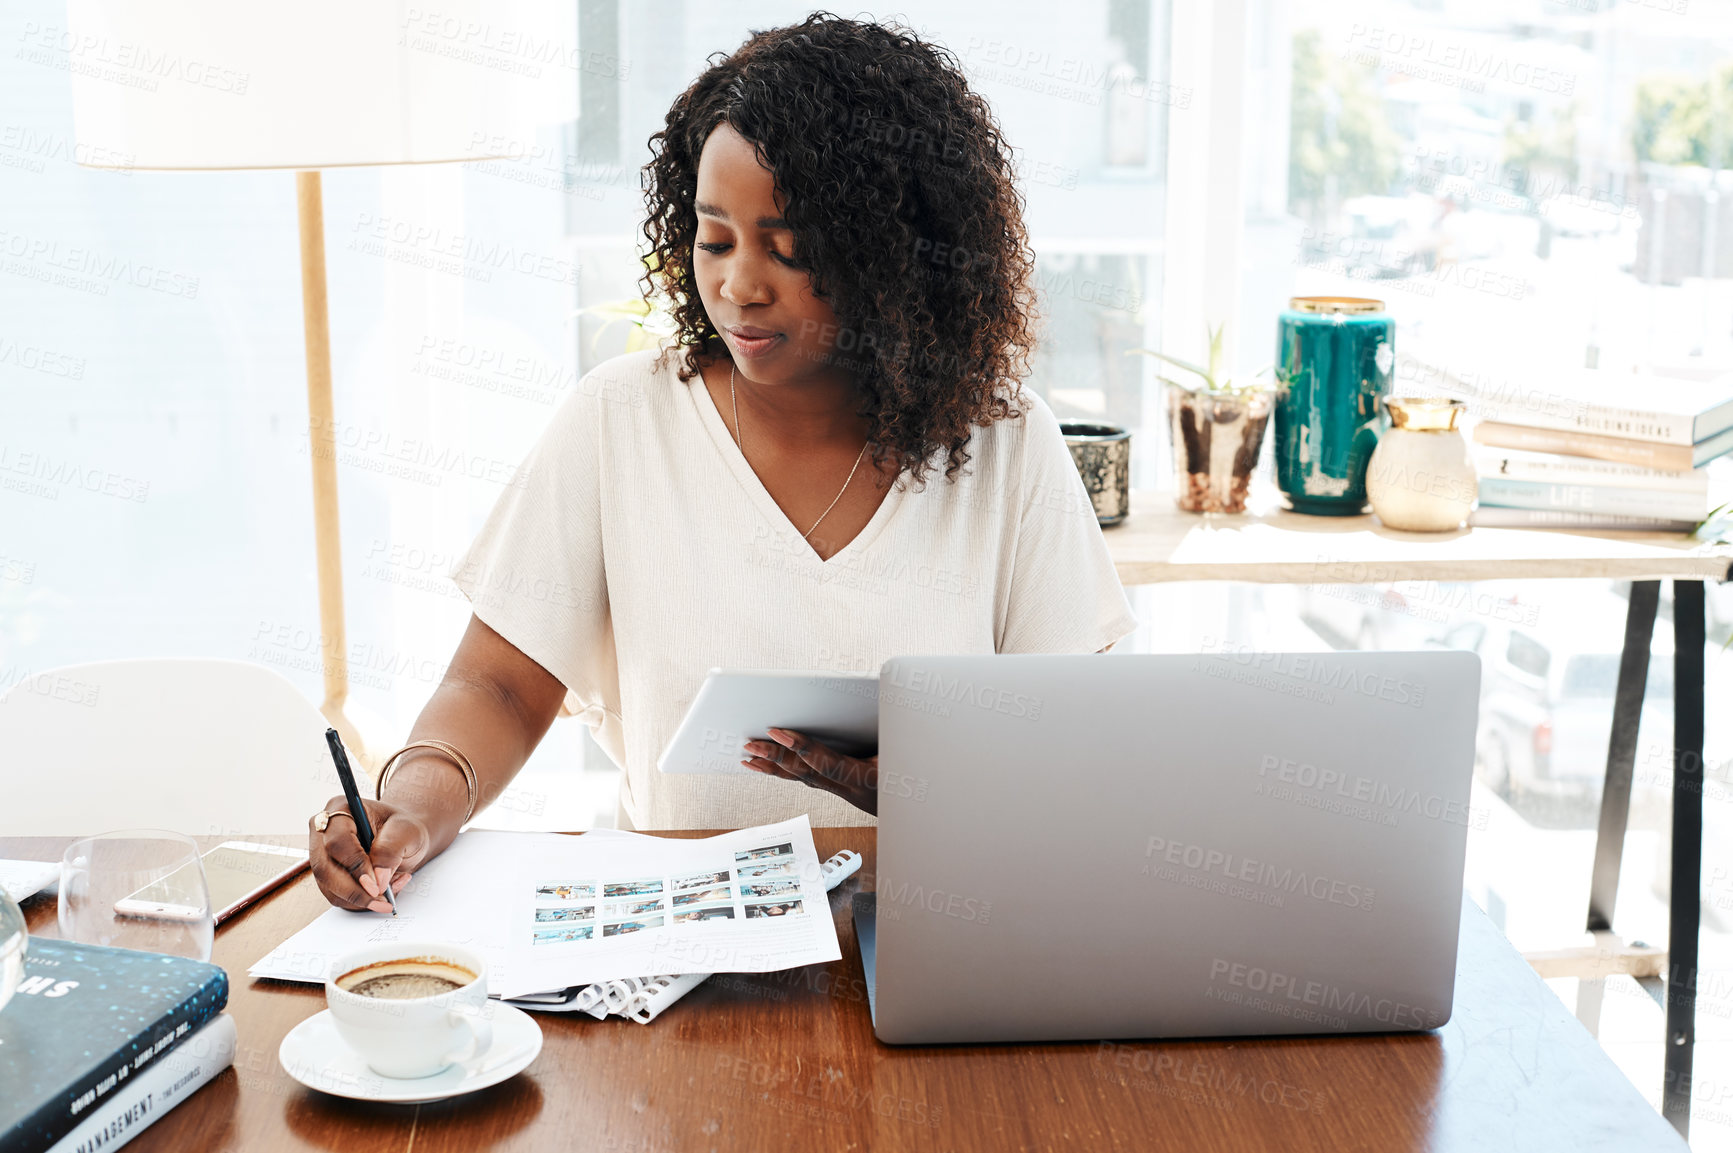 Buy stock photo Shot of a young businesswoman writing notes while working on a digital tablet in an office